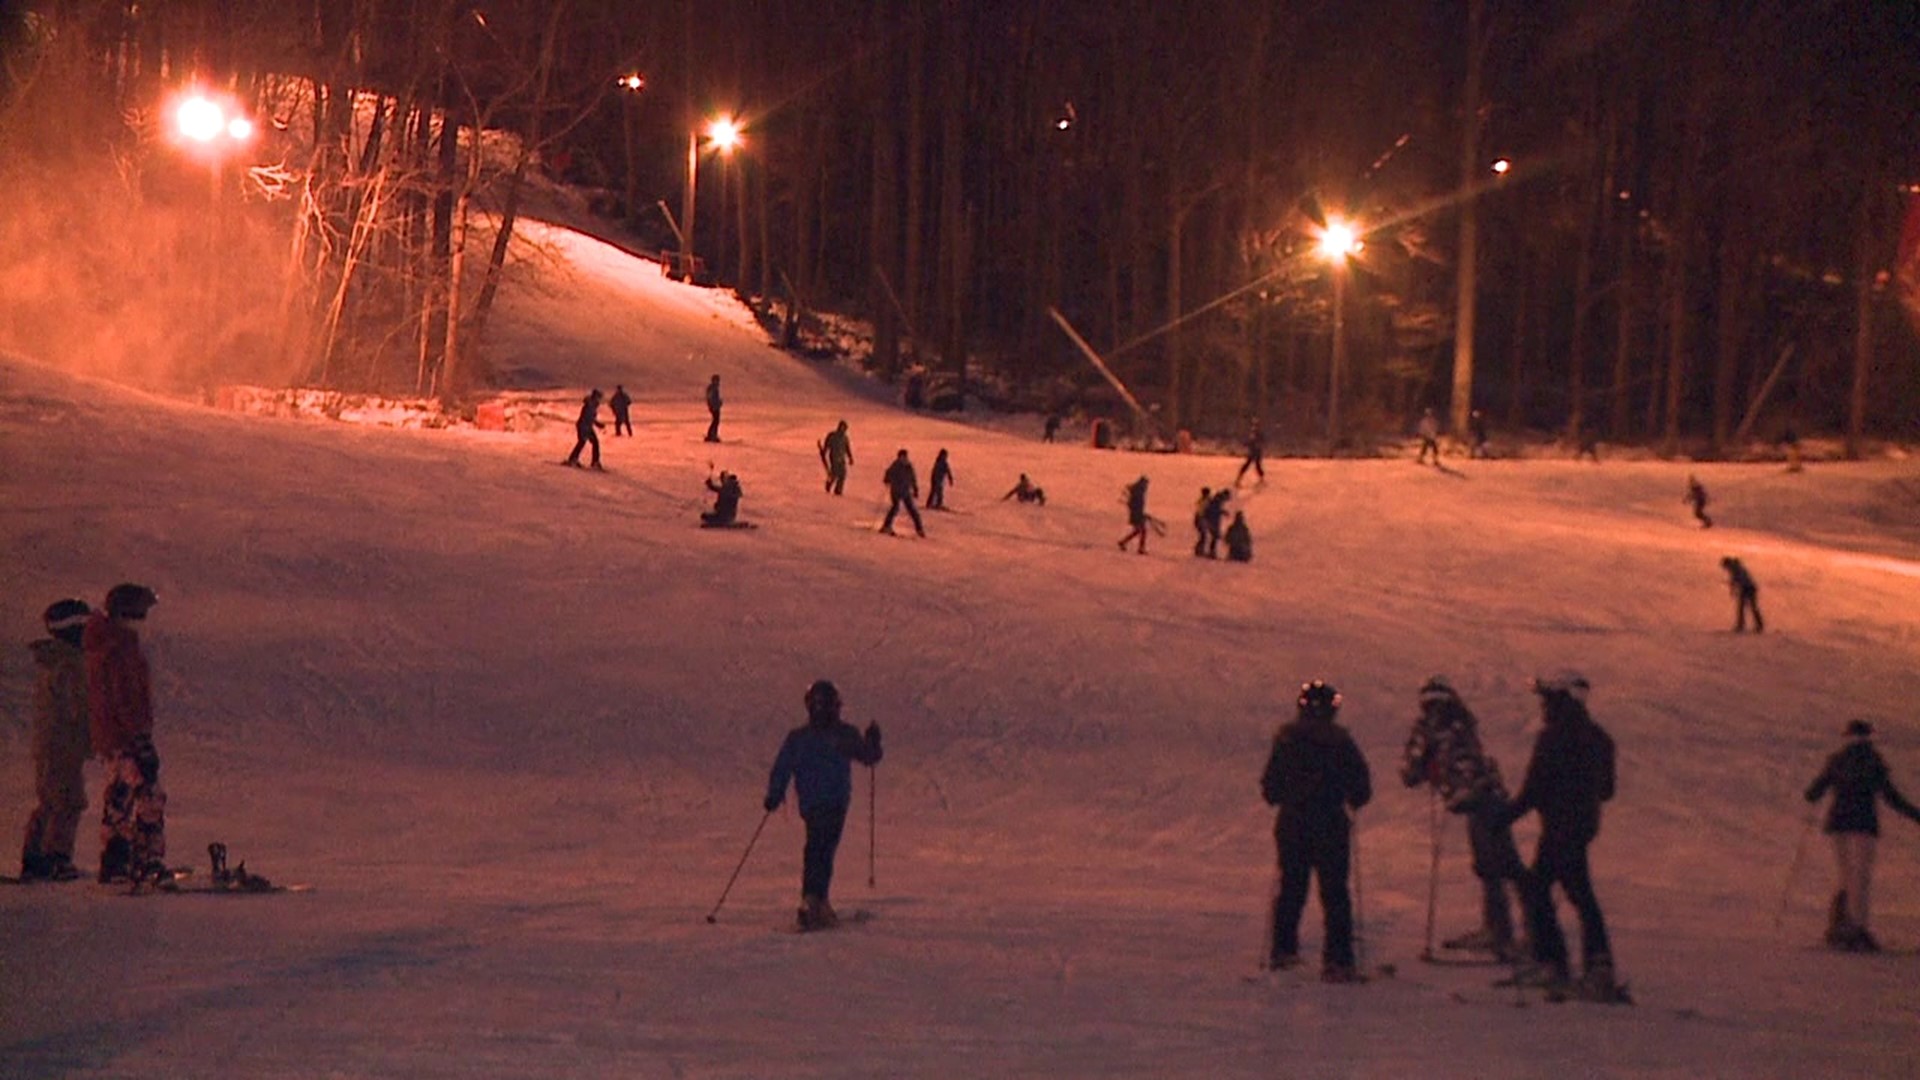 After a holiday weekend of freezing temperatures, skiers layered up and hit the slopes.